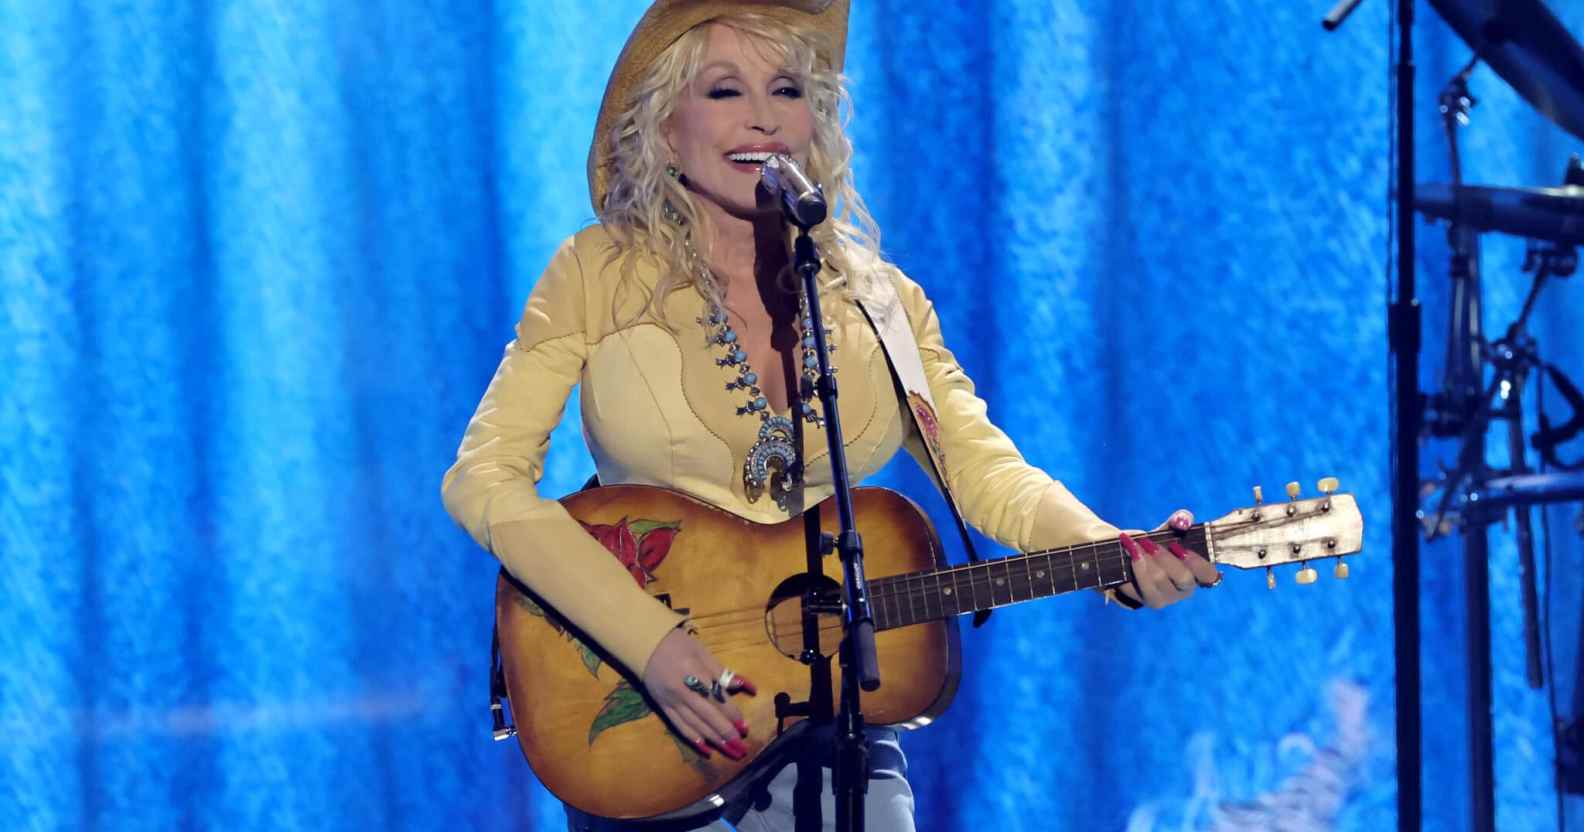 Dolly Parton "respectfully" bows out of Hall of Fame nomination